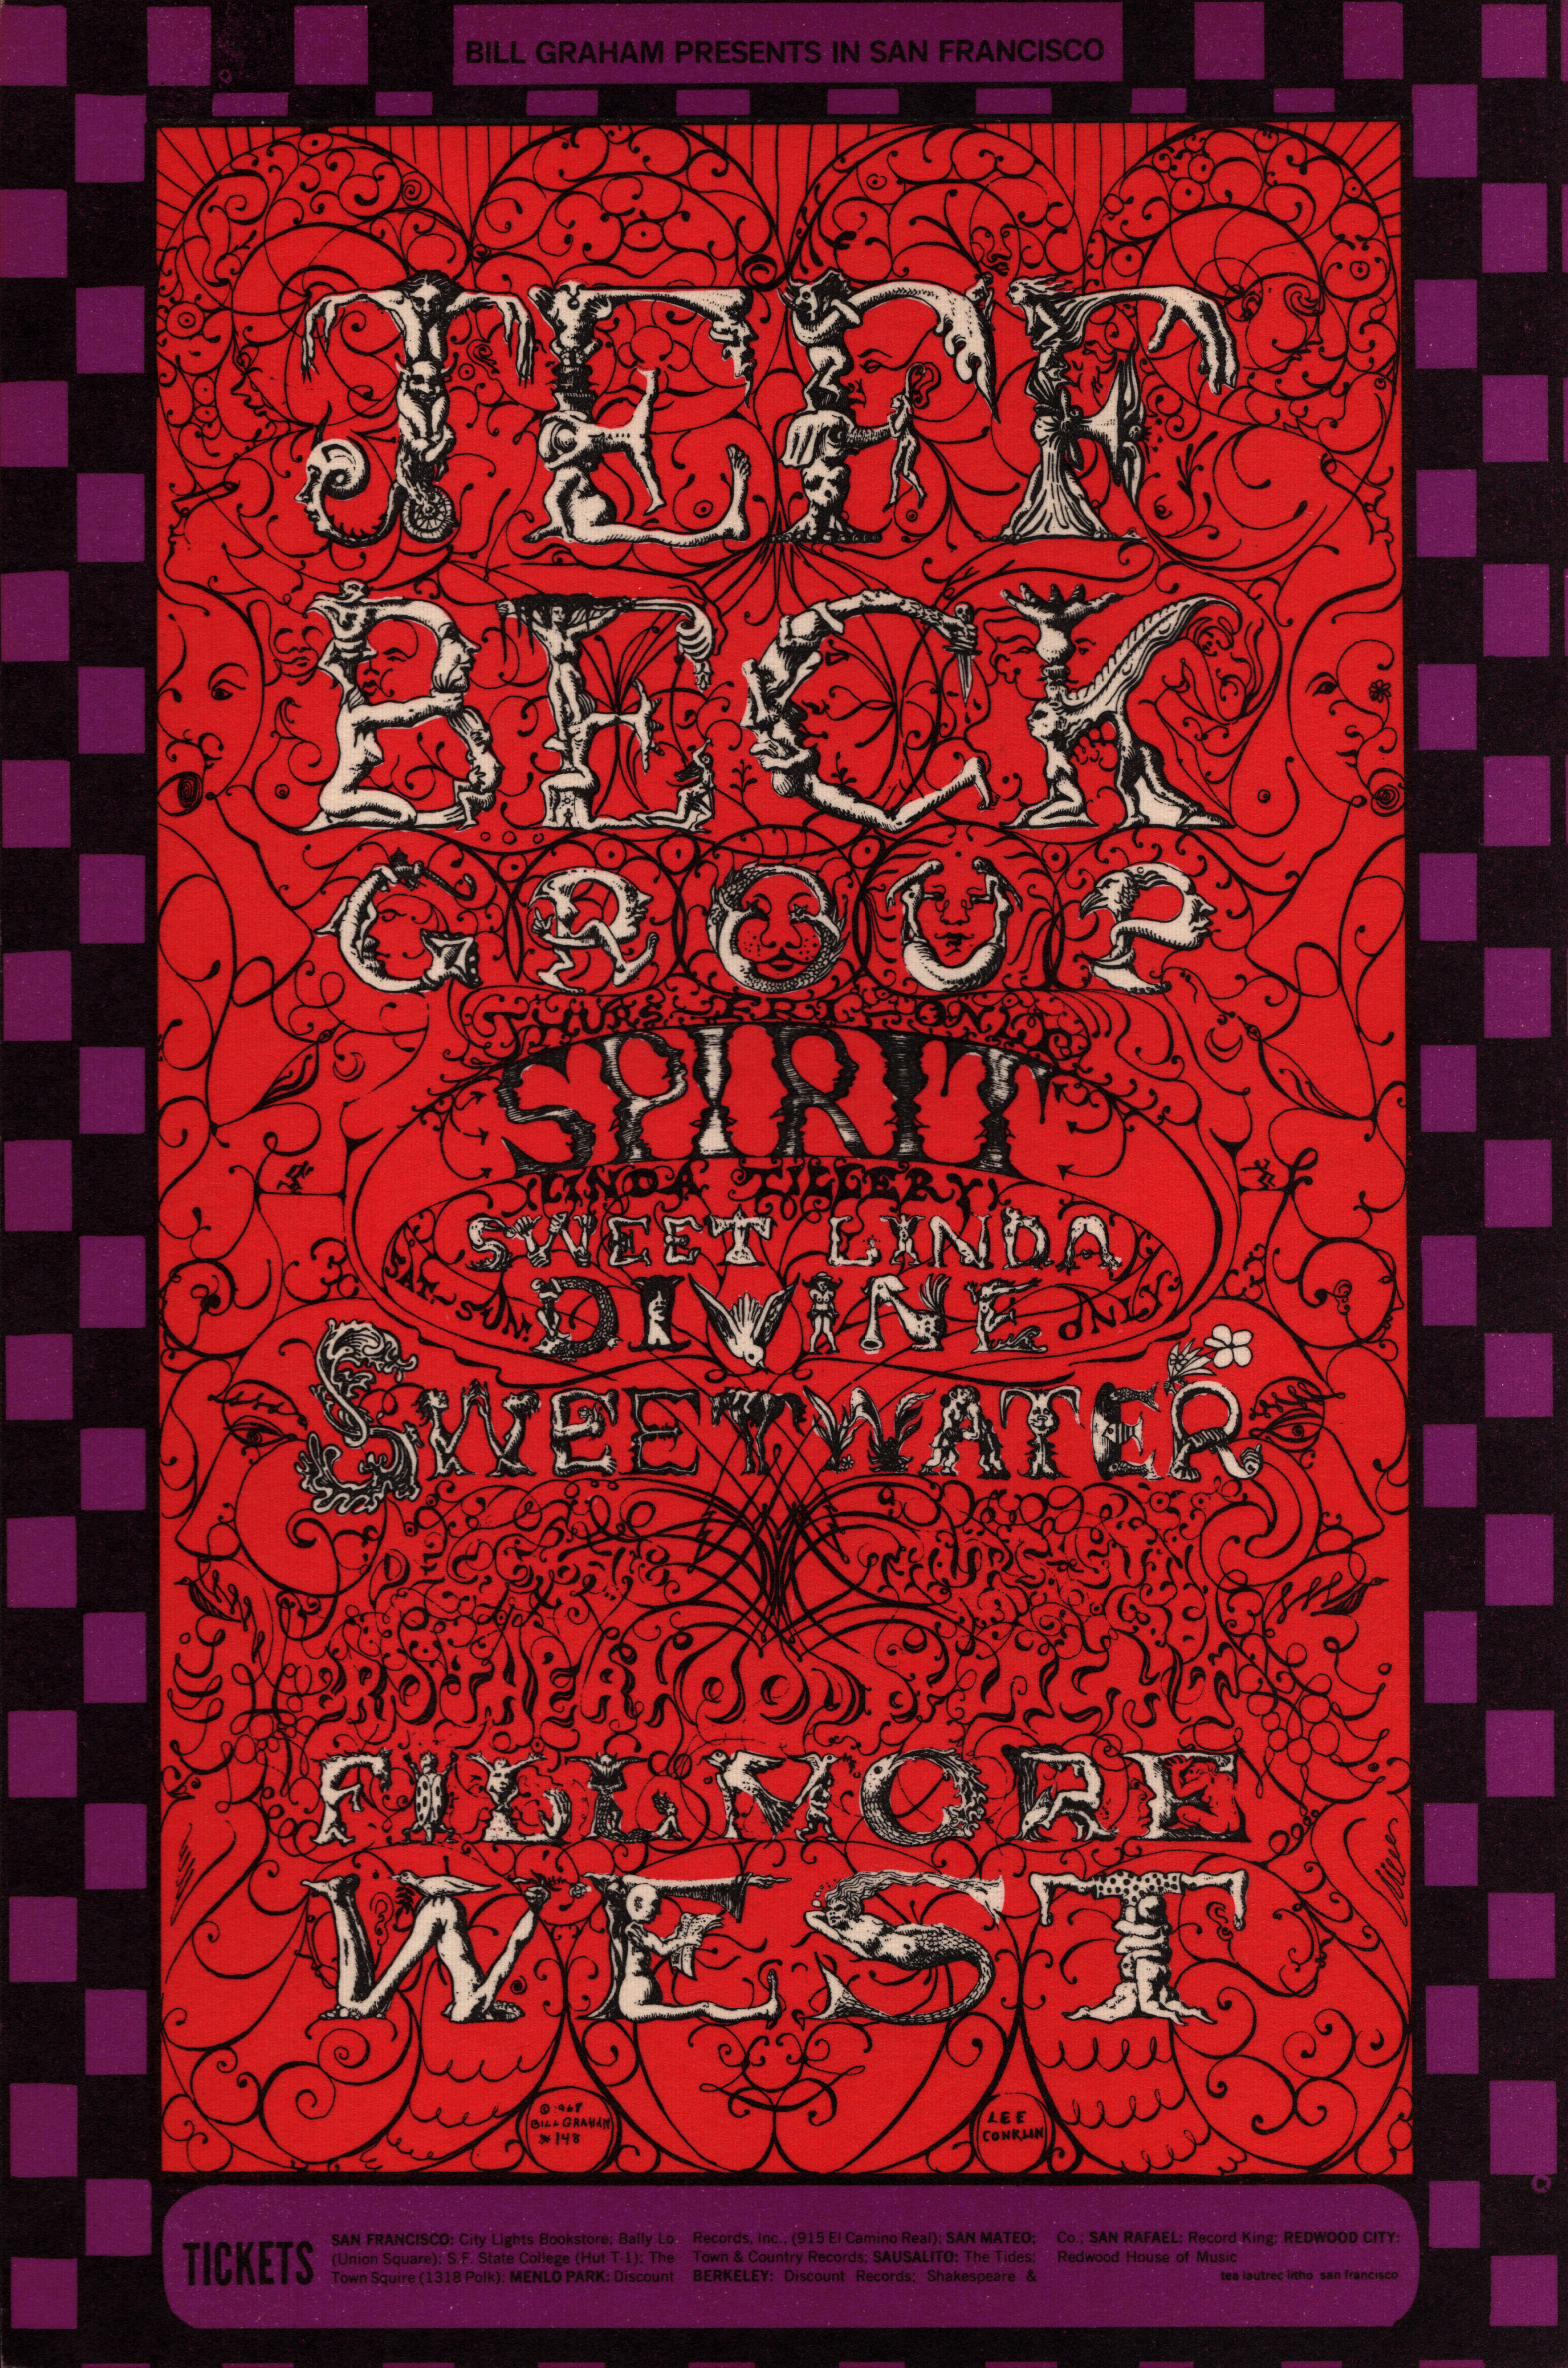 Jeff Beck Group Poster